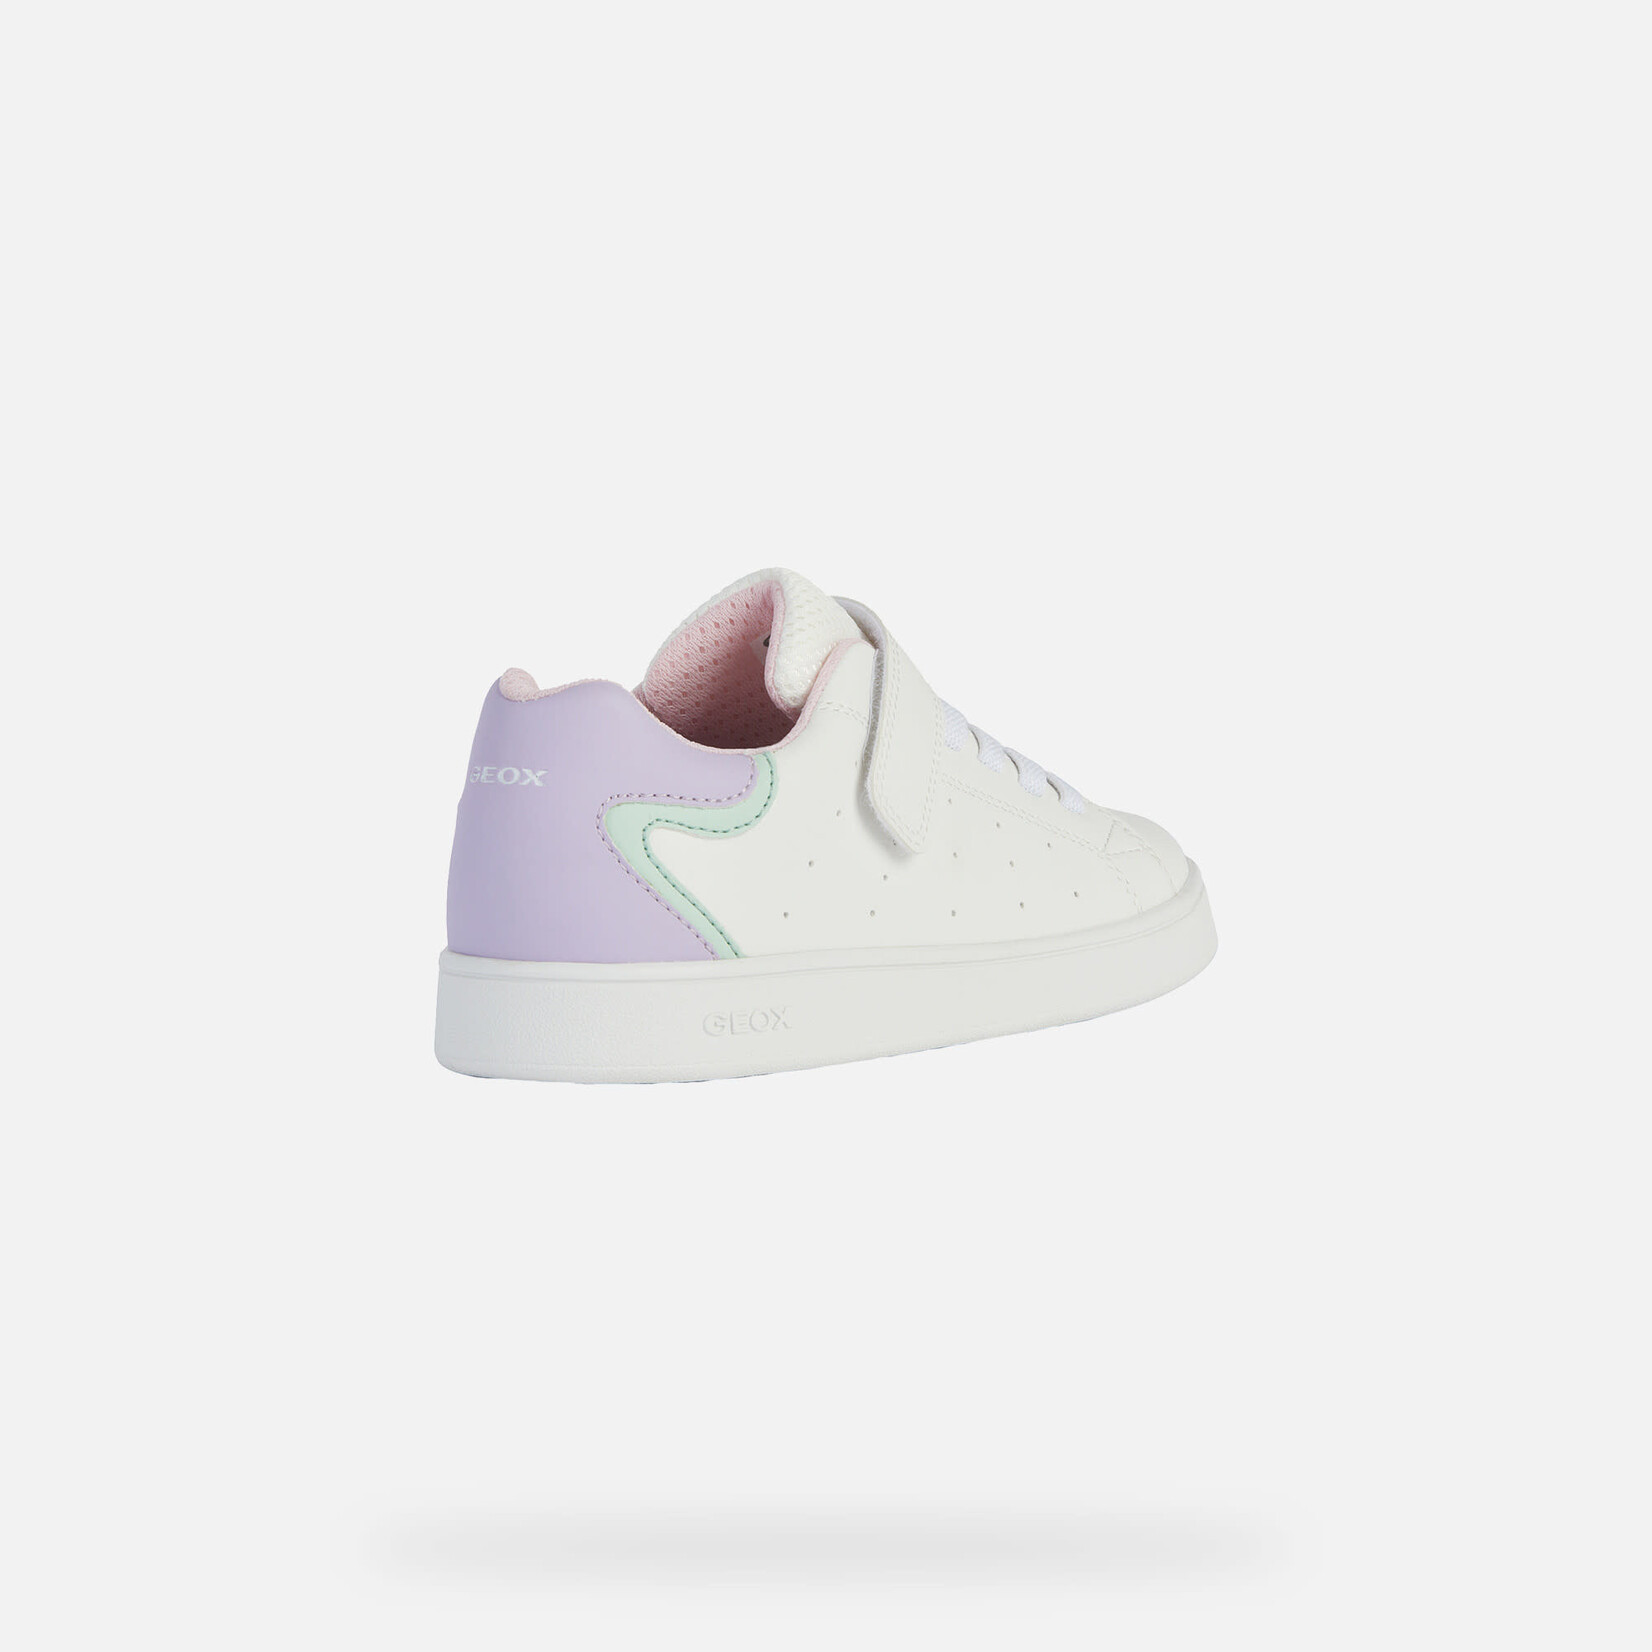 Geox GEOX - White synthetic leather sneakers 'Eclyper - White/Lilac'